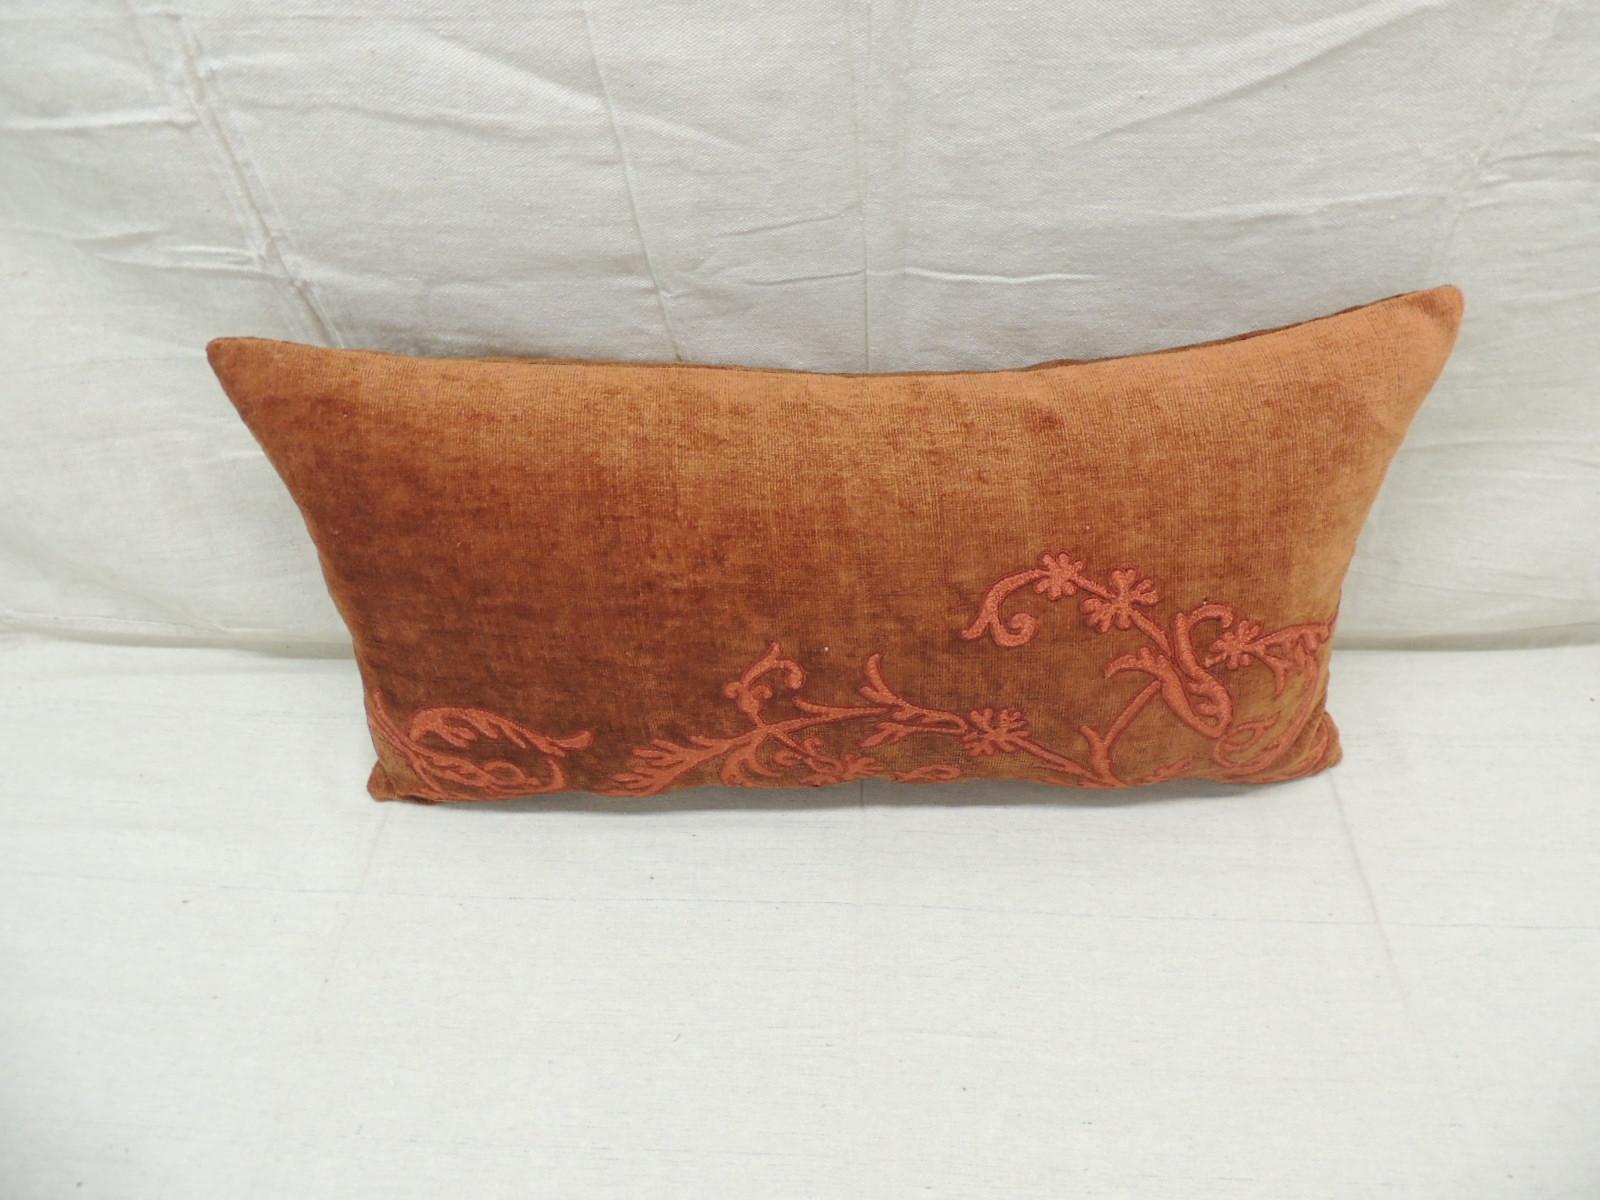 Suzani Vintage Orange and Brown Embroidery Bolster Decorative Pillow